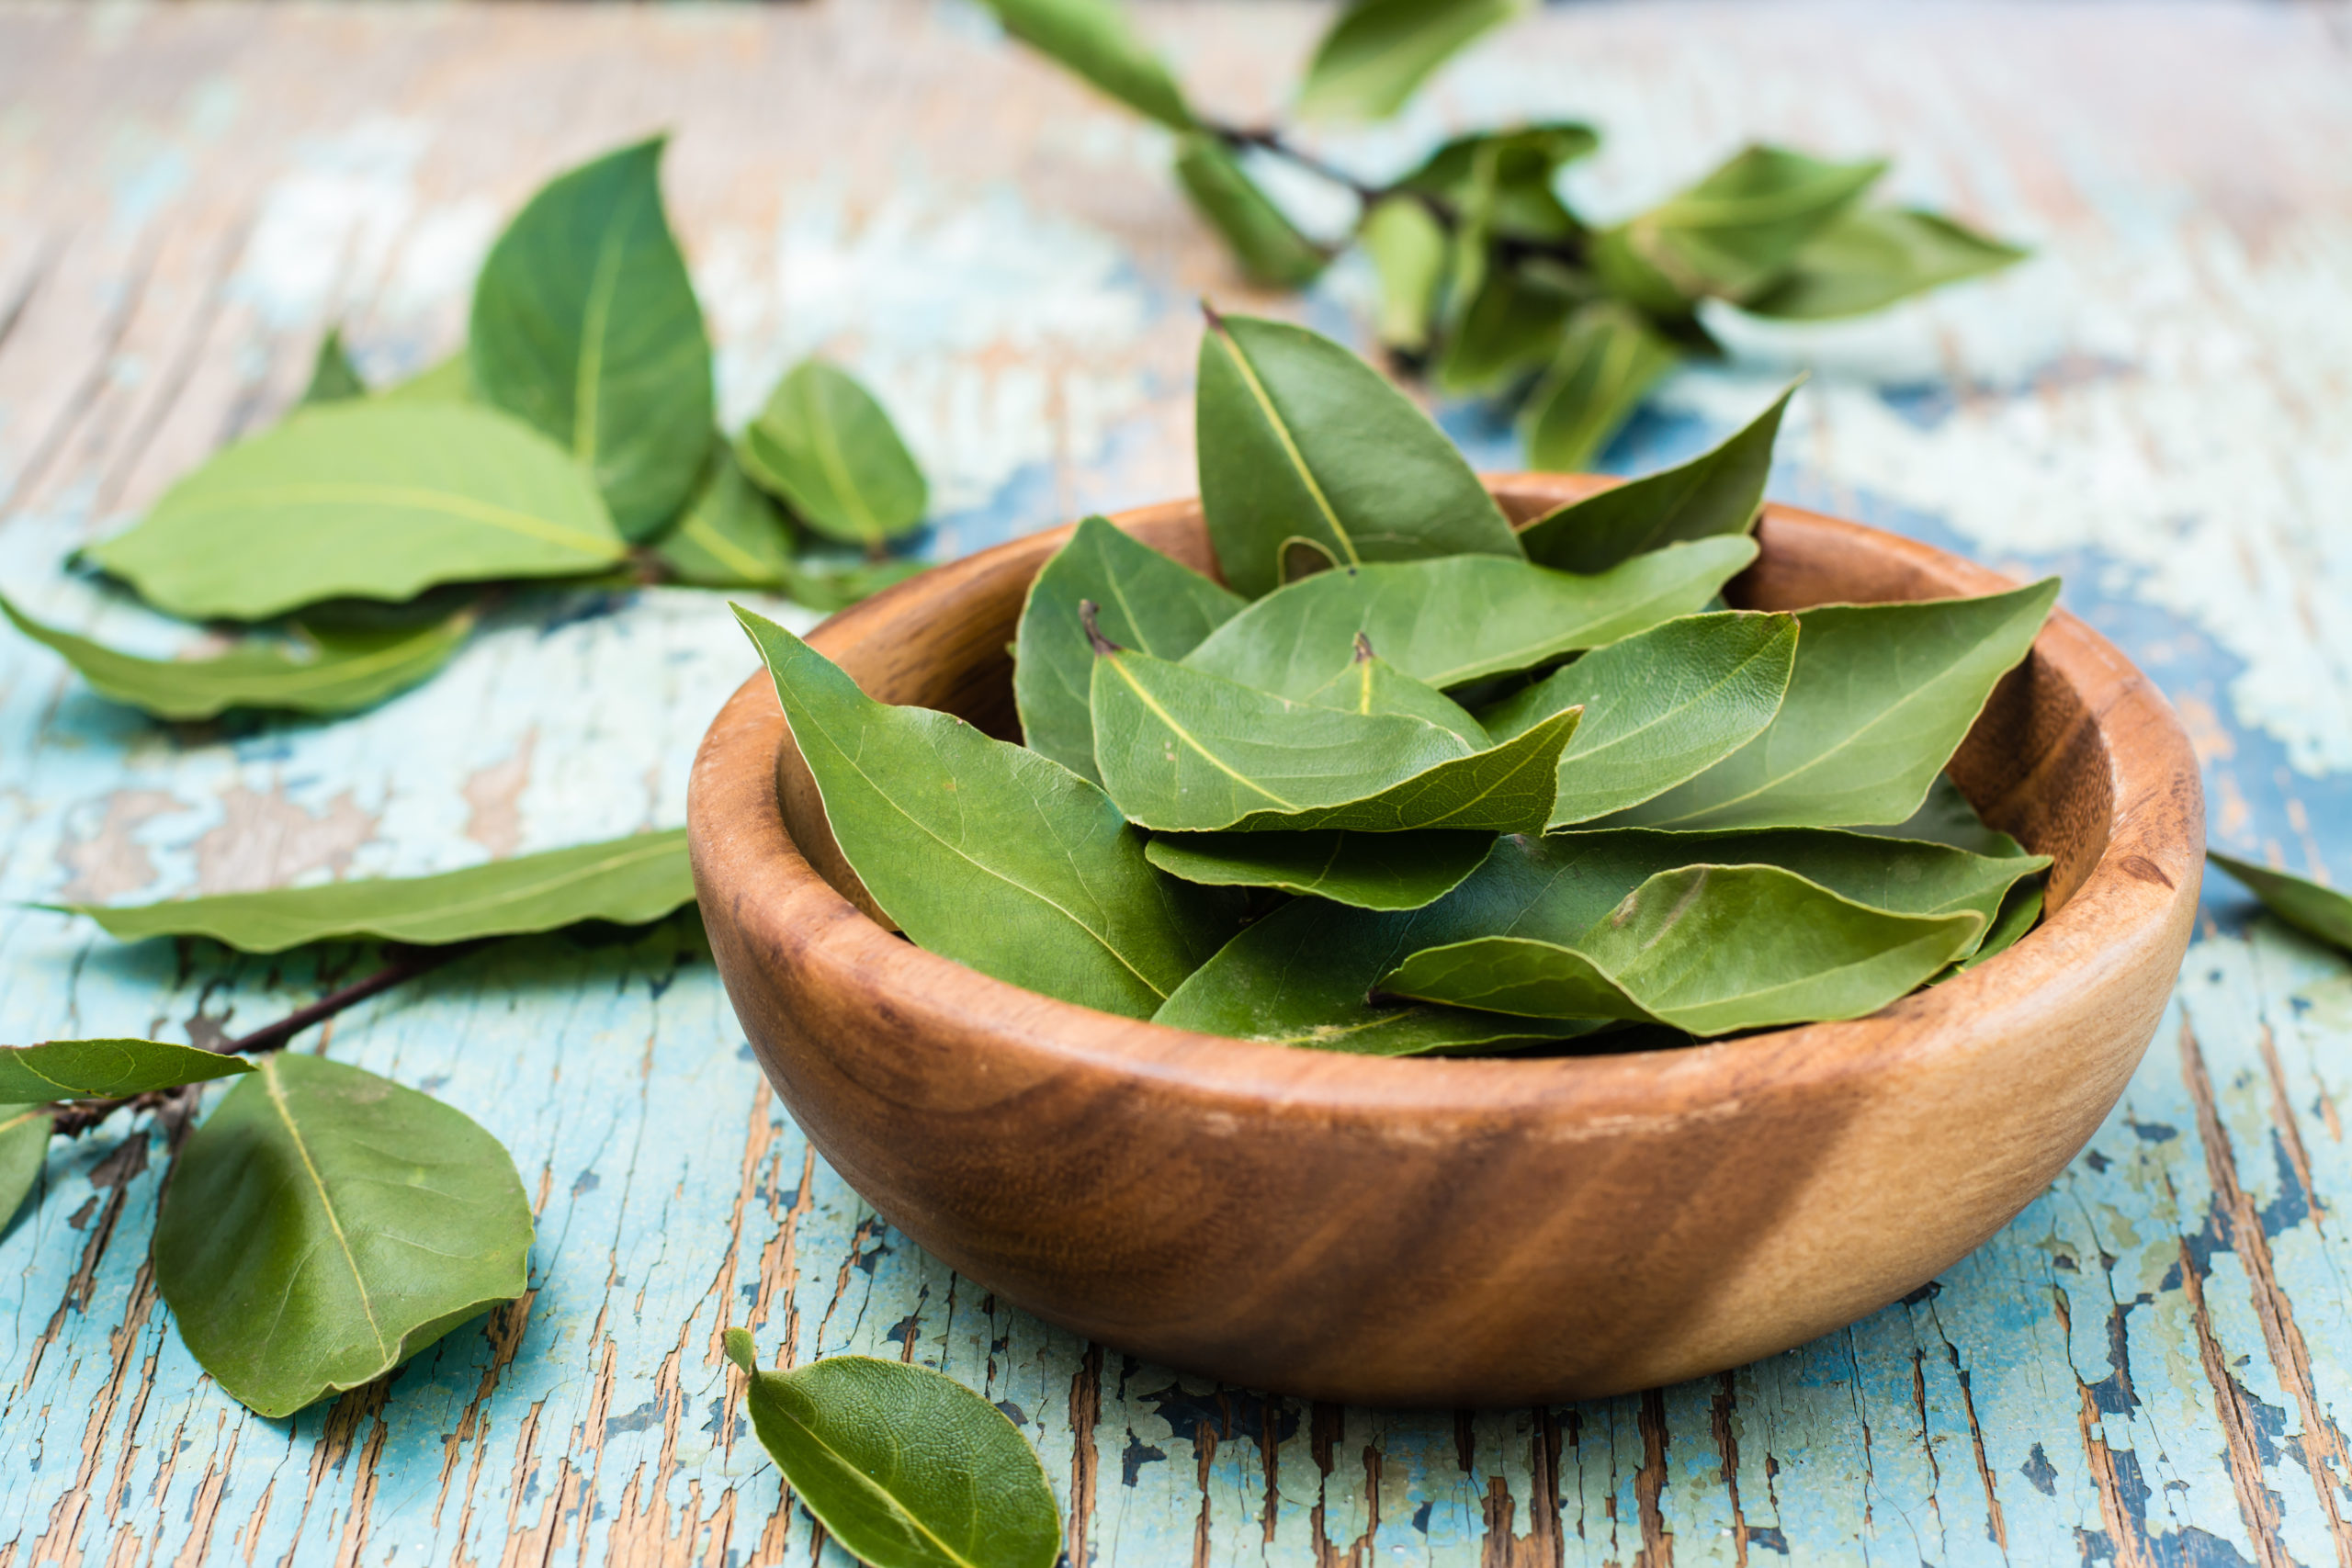 Are Bay Leaves Healthy for You?